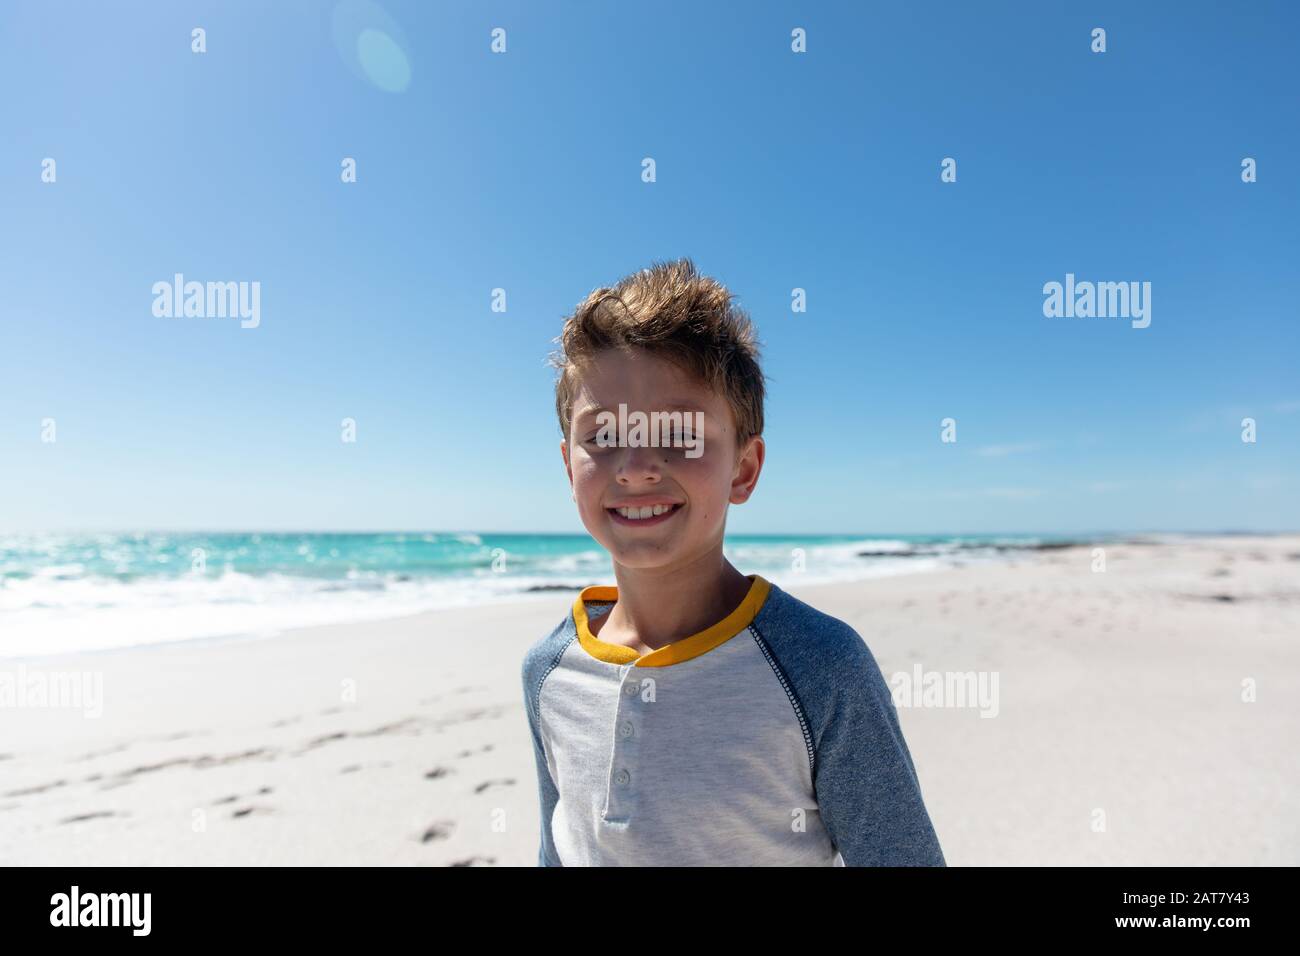 Boy smiling at the beach Stock Photo